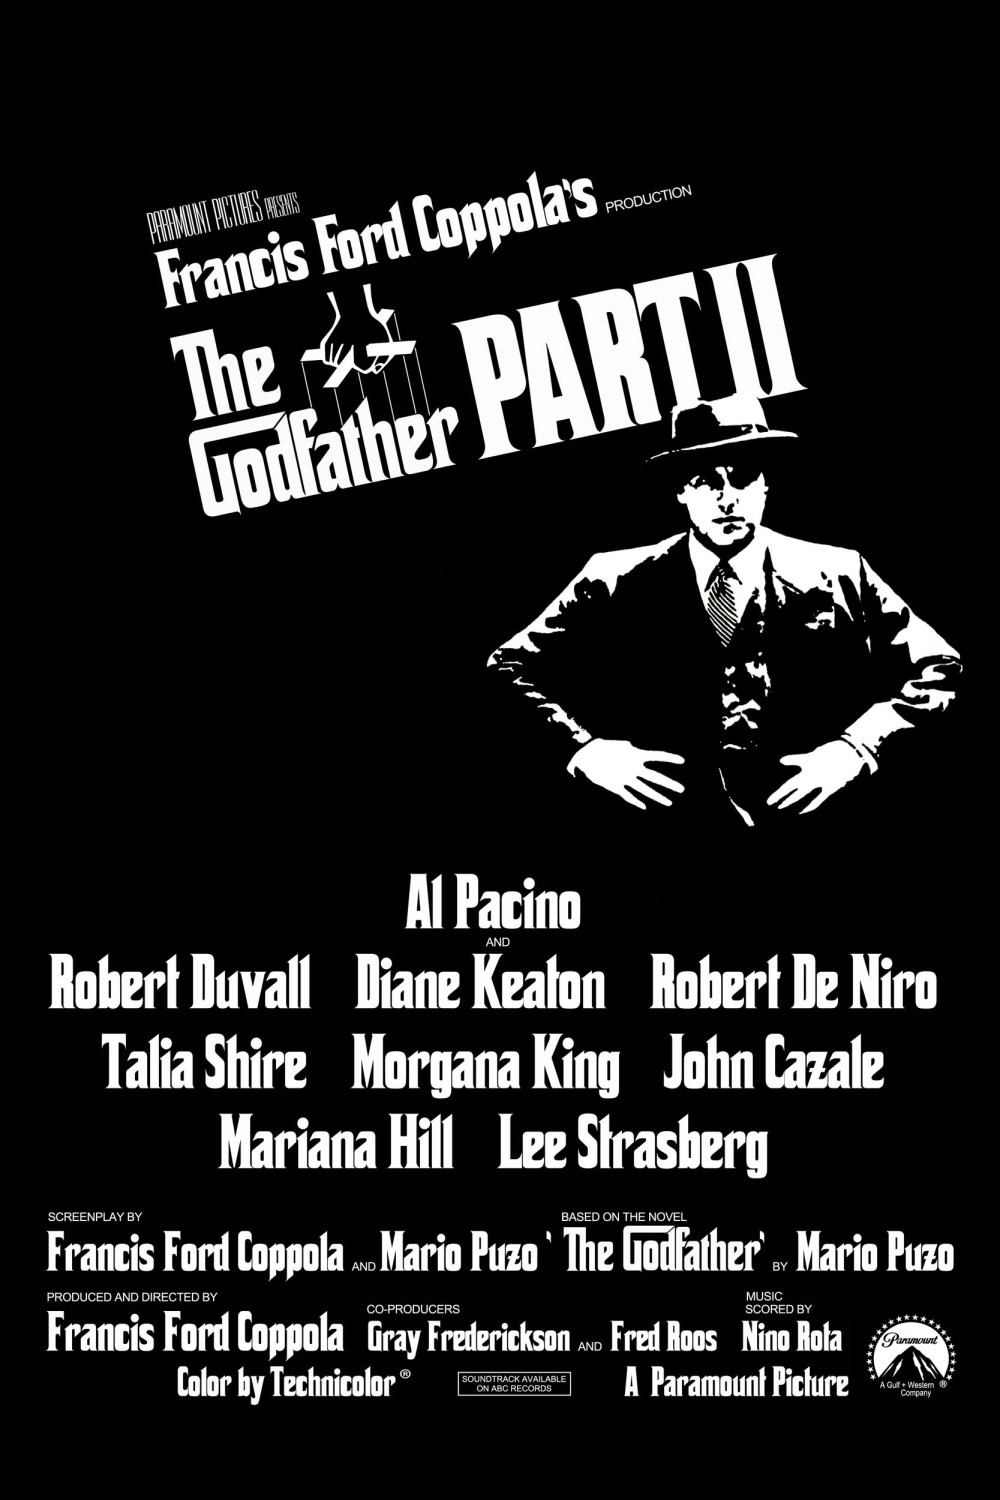 The Godfather: Part II (1974) Poster